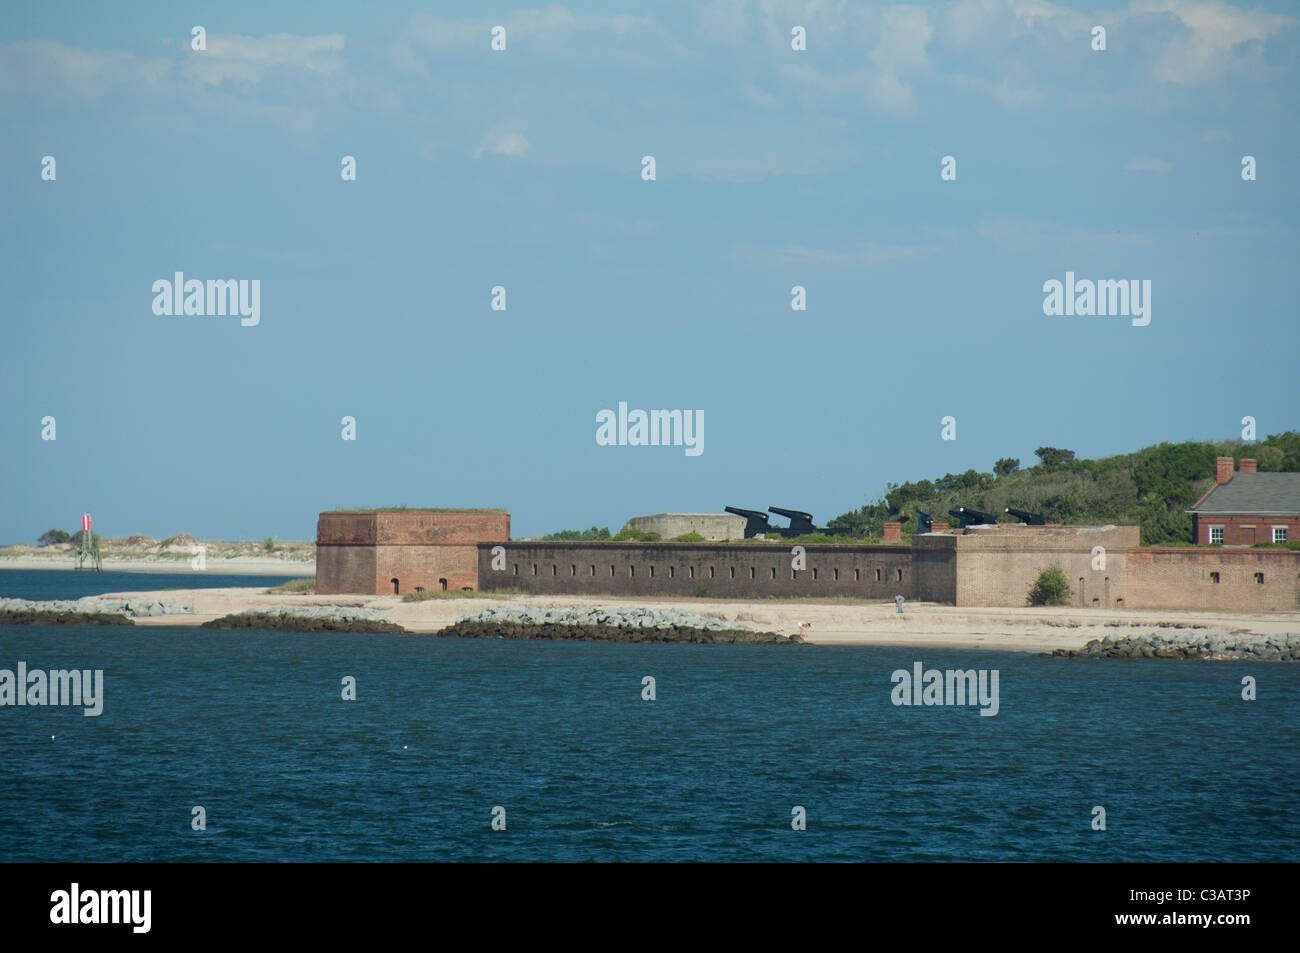 Florida, Amelia Island. Historic Fort Clinch State Park, one of Florida's oldest state parks. Fort Clinch, c. 1847. Stock Photo